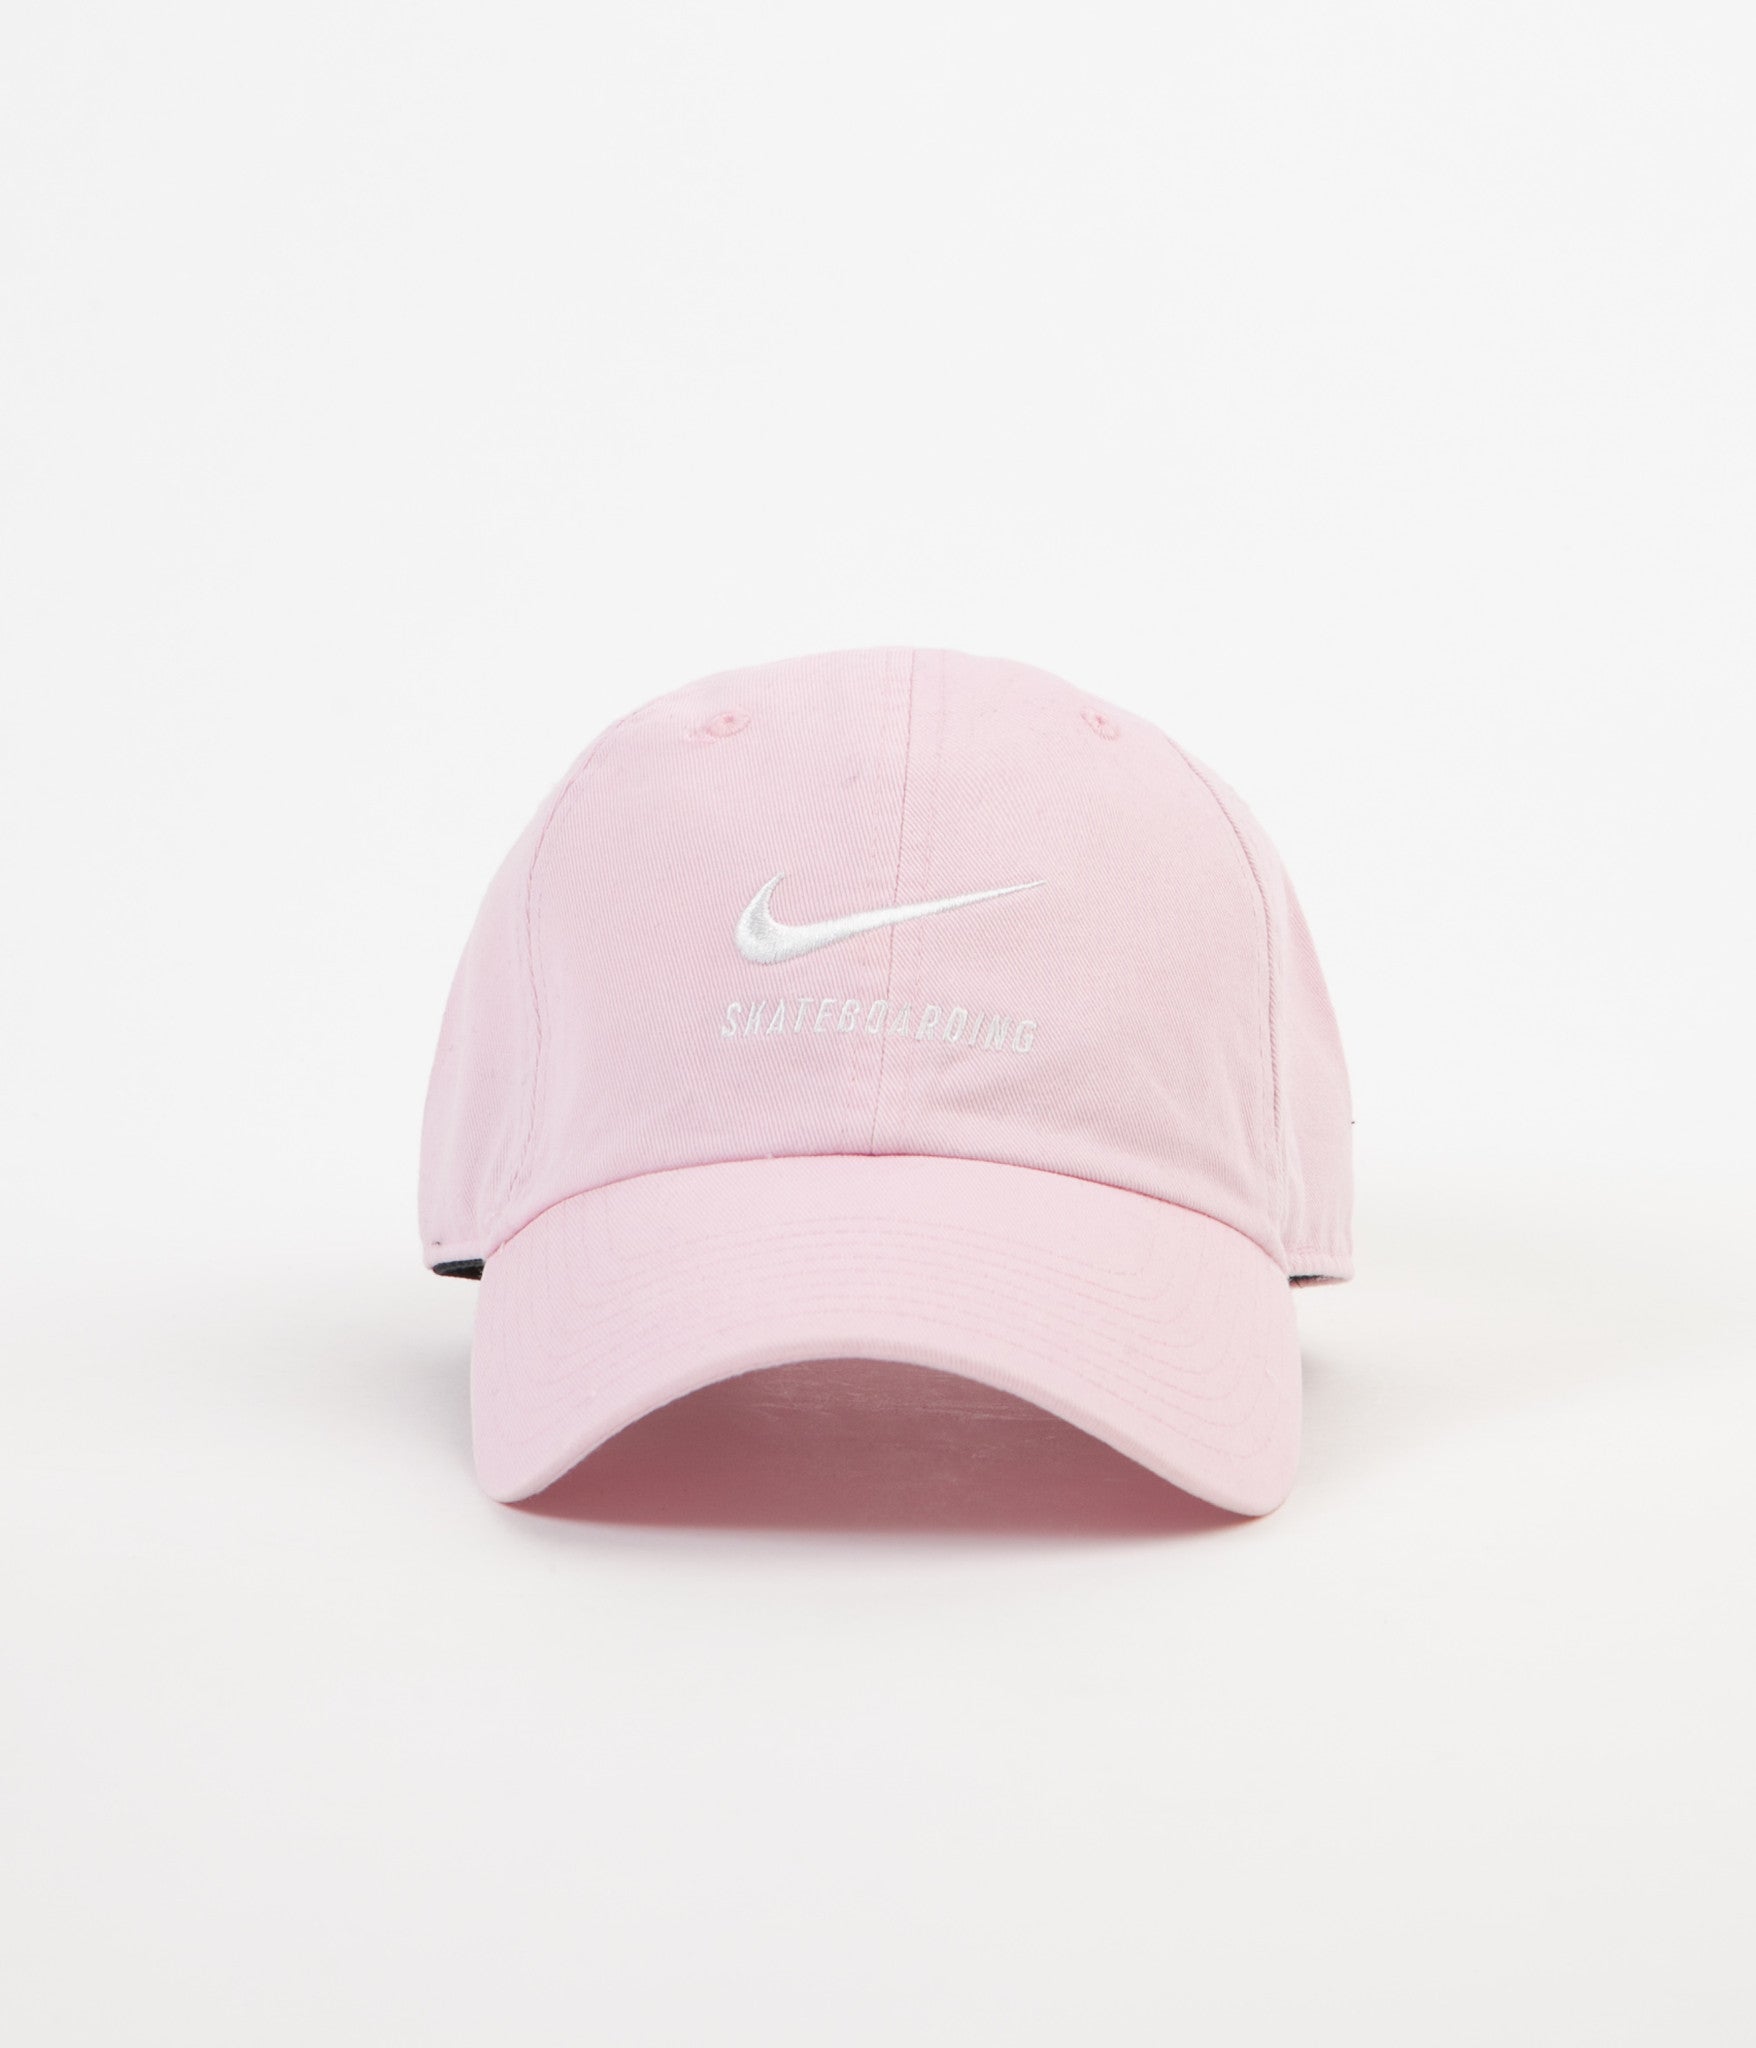 white and pink nike hat